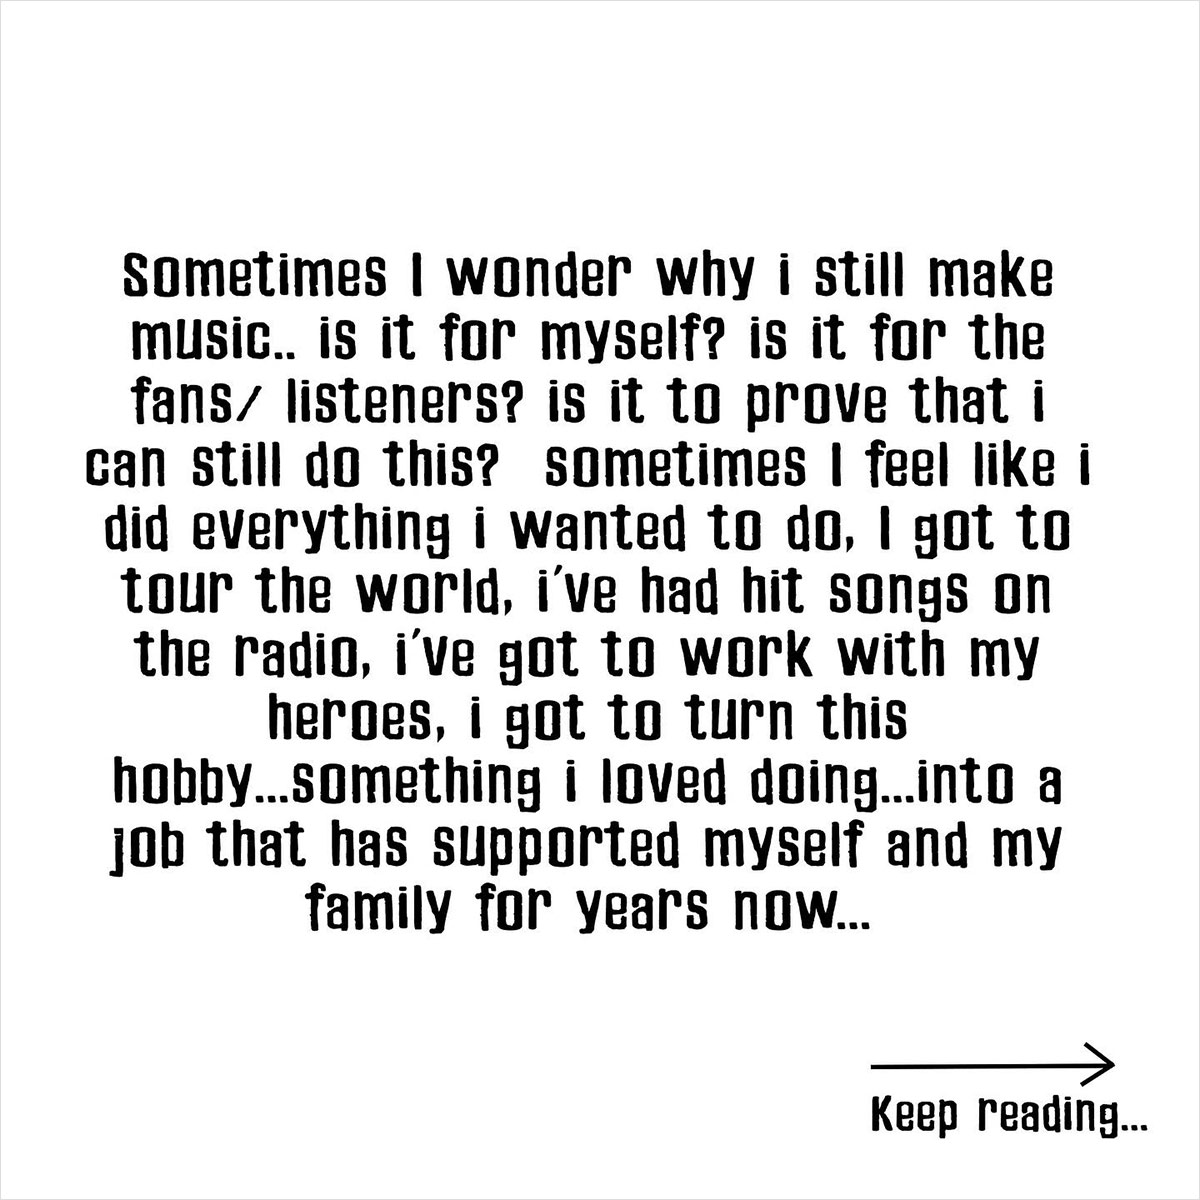 A message from rapper Classified about contemplating retirement